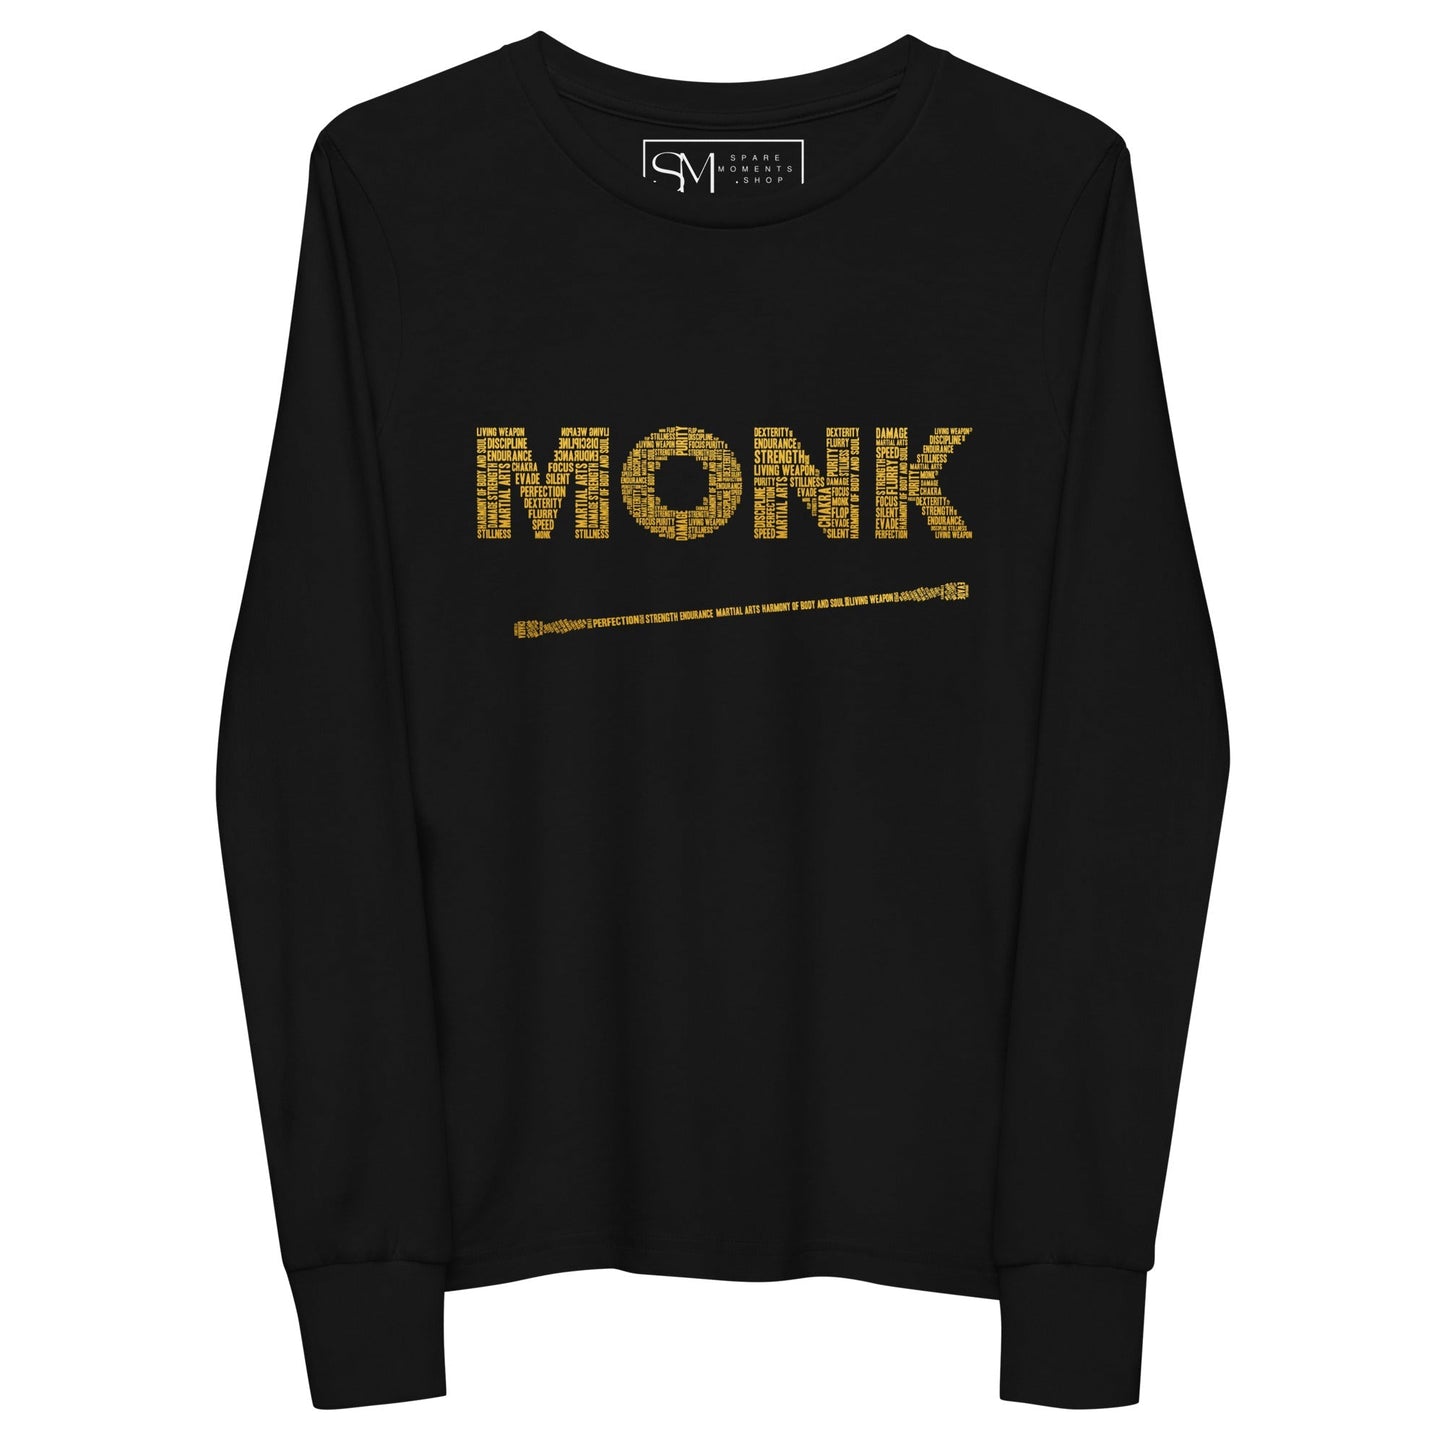 Monk DnD Youth Long Sleeve Tee